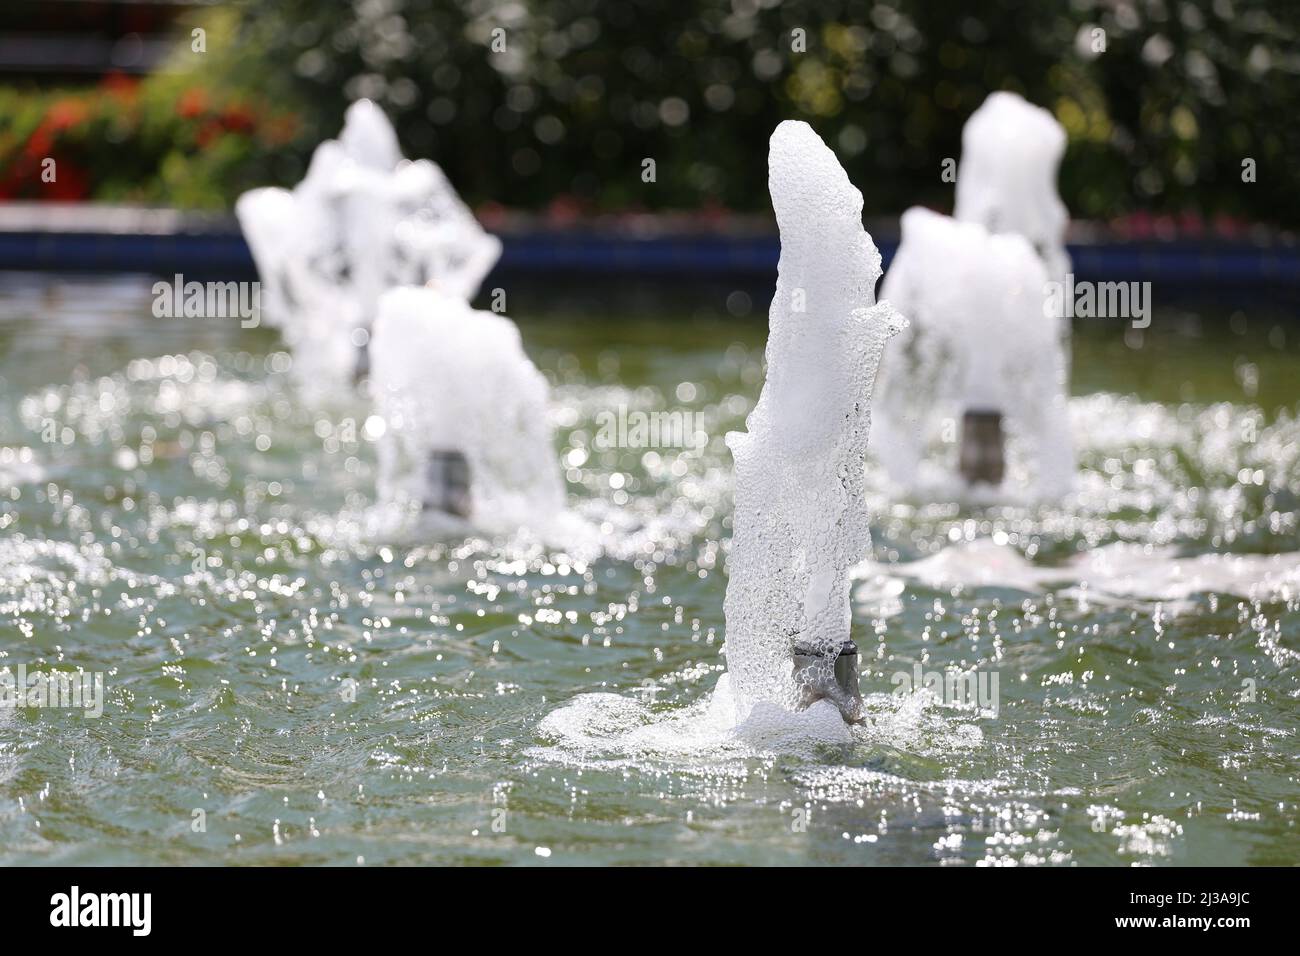 Fountain is going up in the garden pond for design in your work. Stock Photo